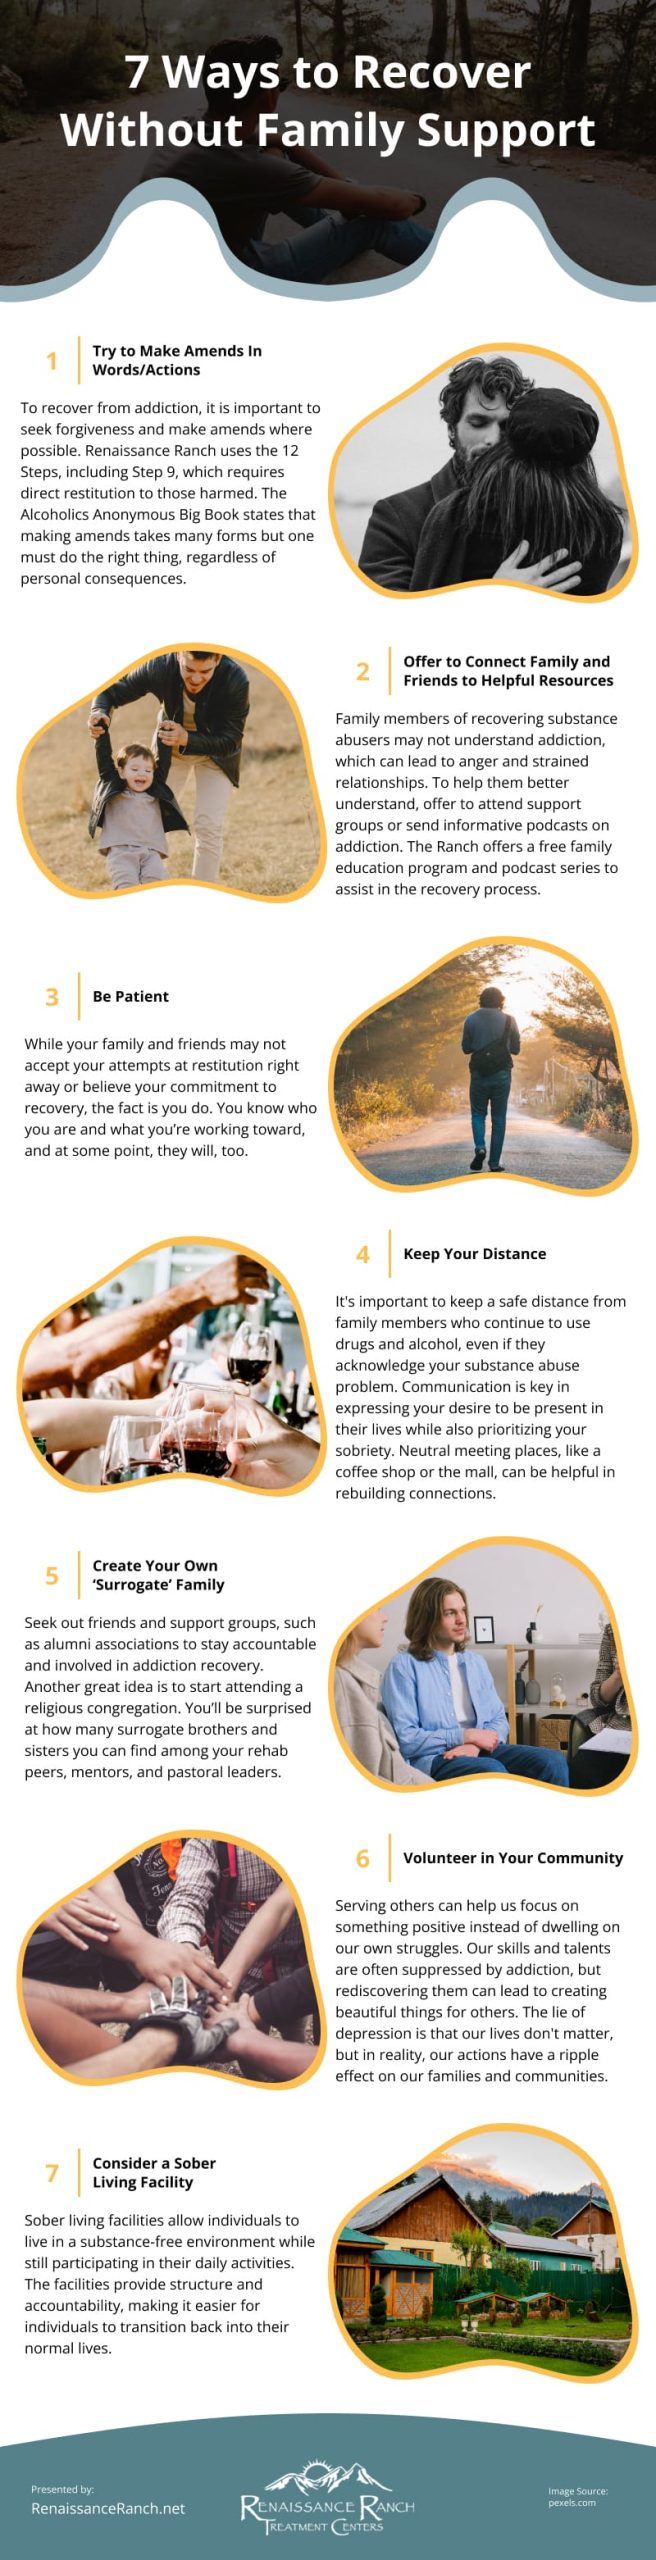 7 Ways to Recover Without Family Support Infographic